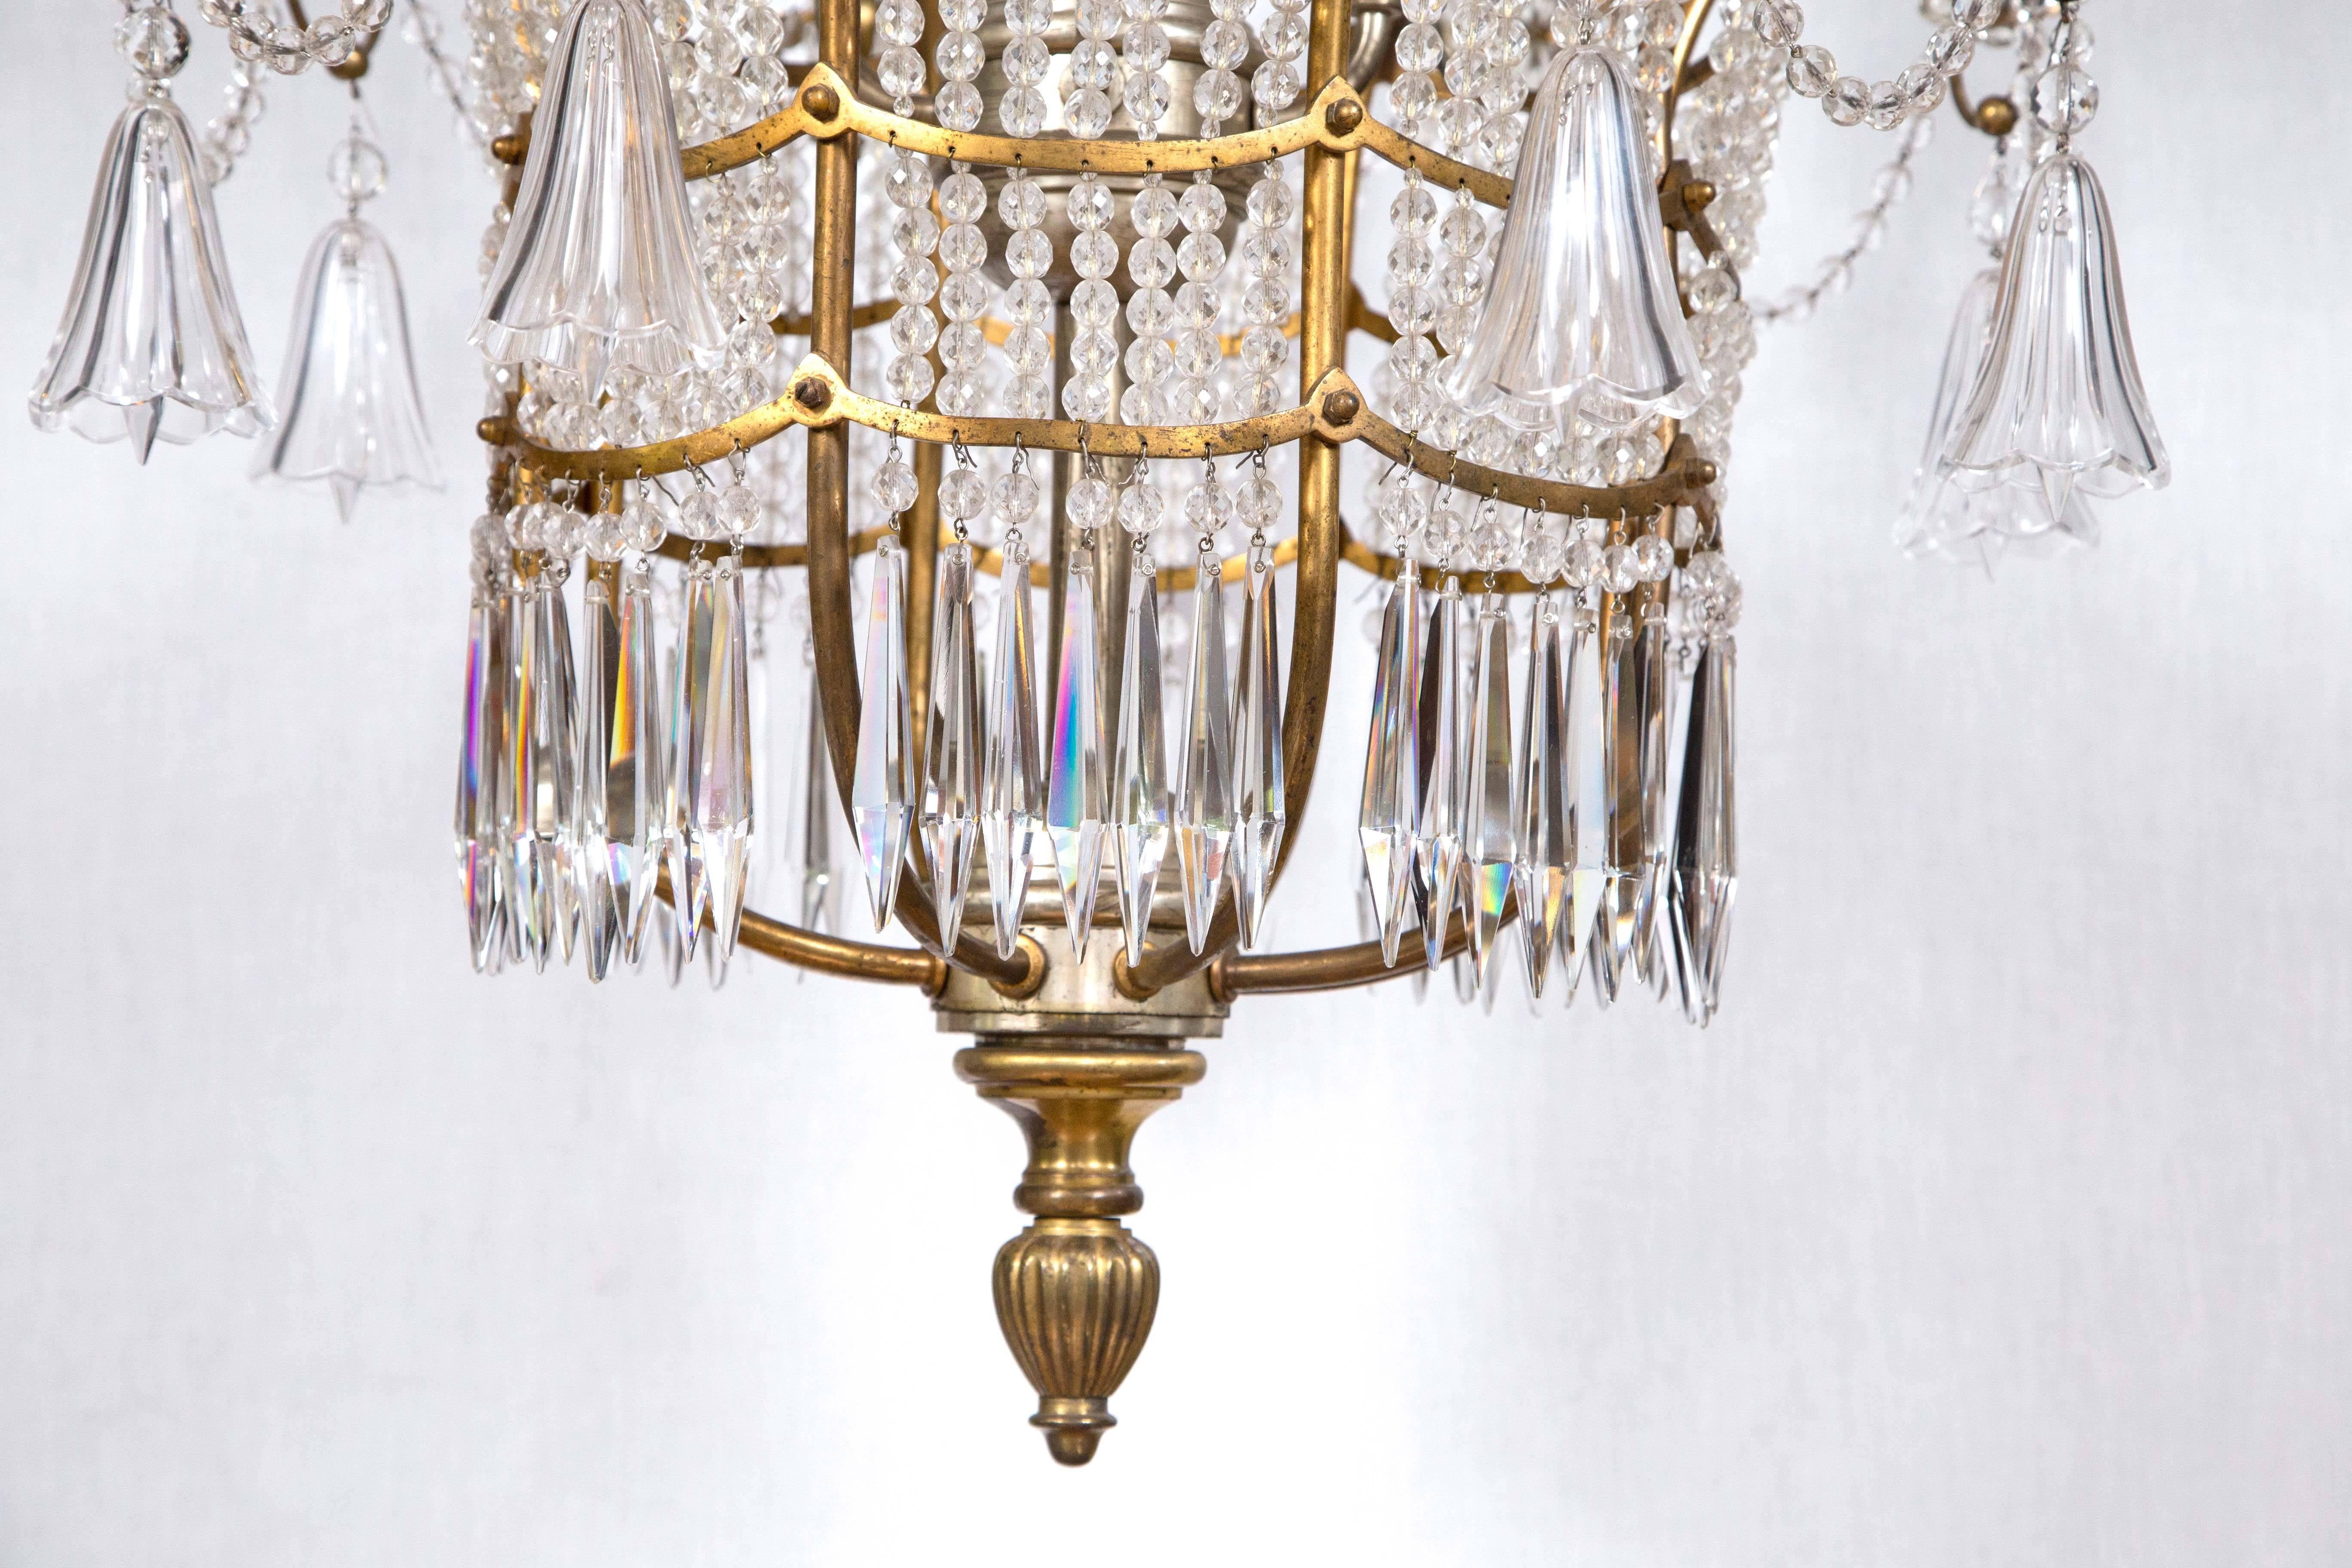 Large 19th century bronze and crystal pagoda style chandelier. Original price was $35,000.